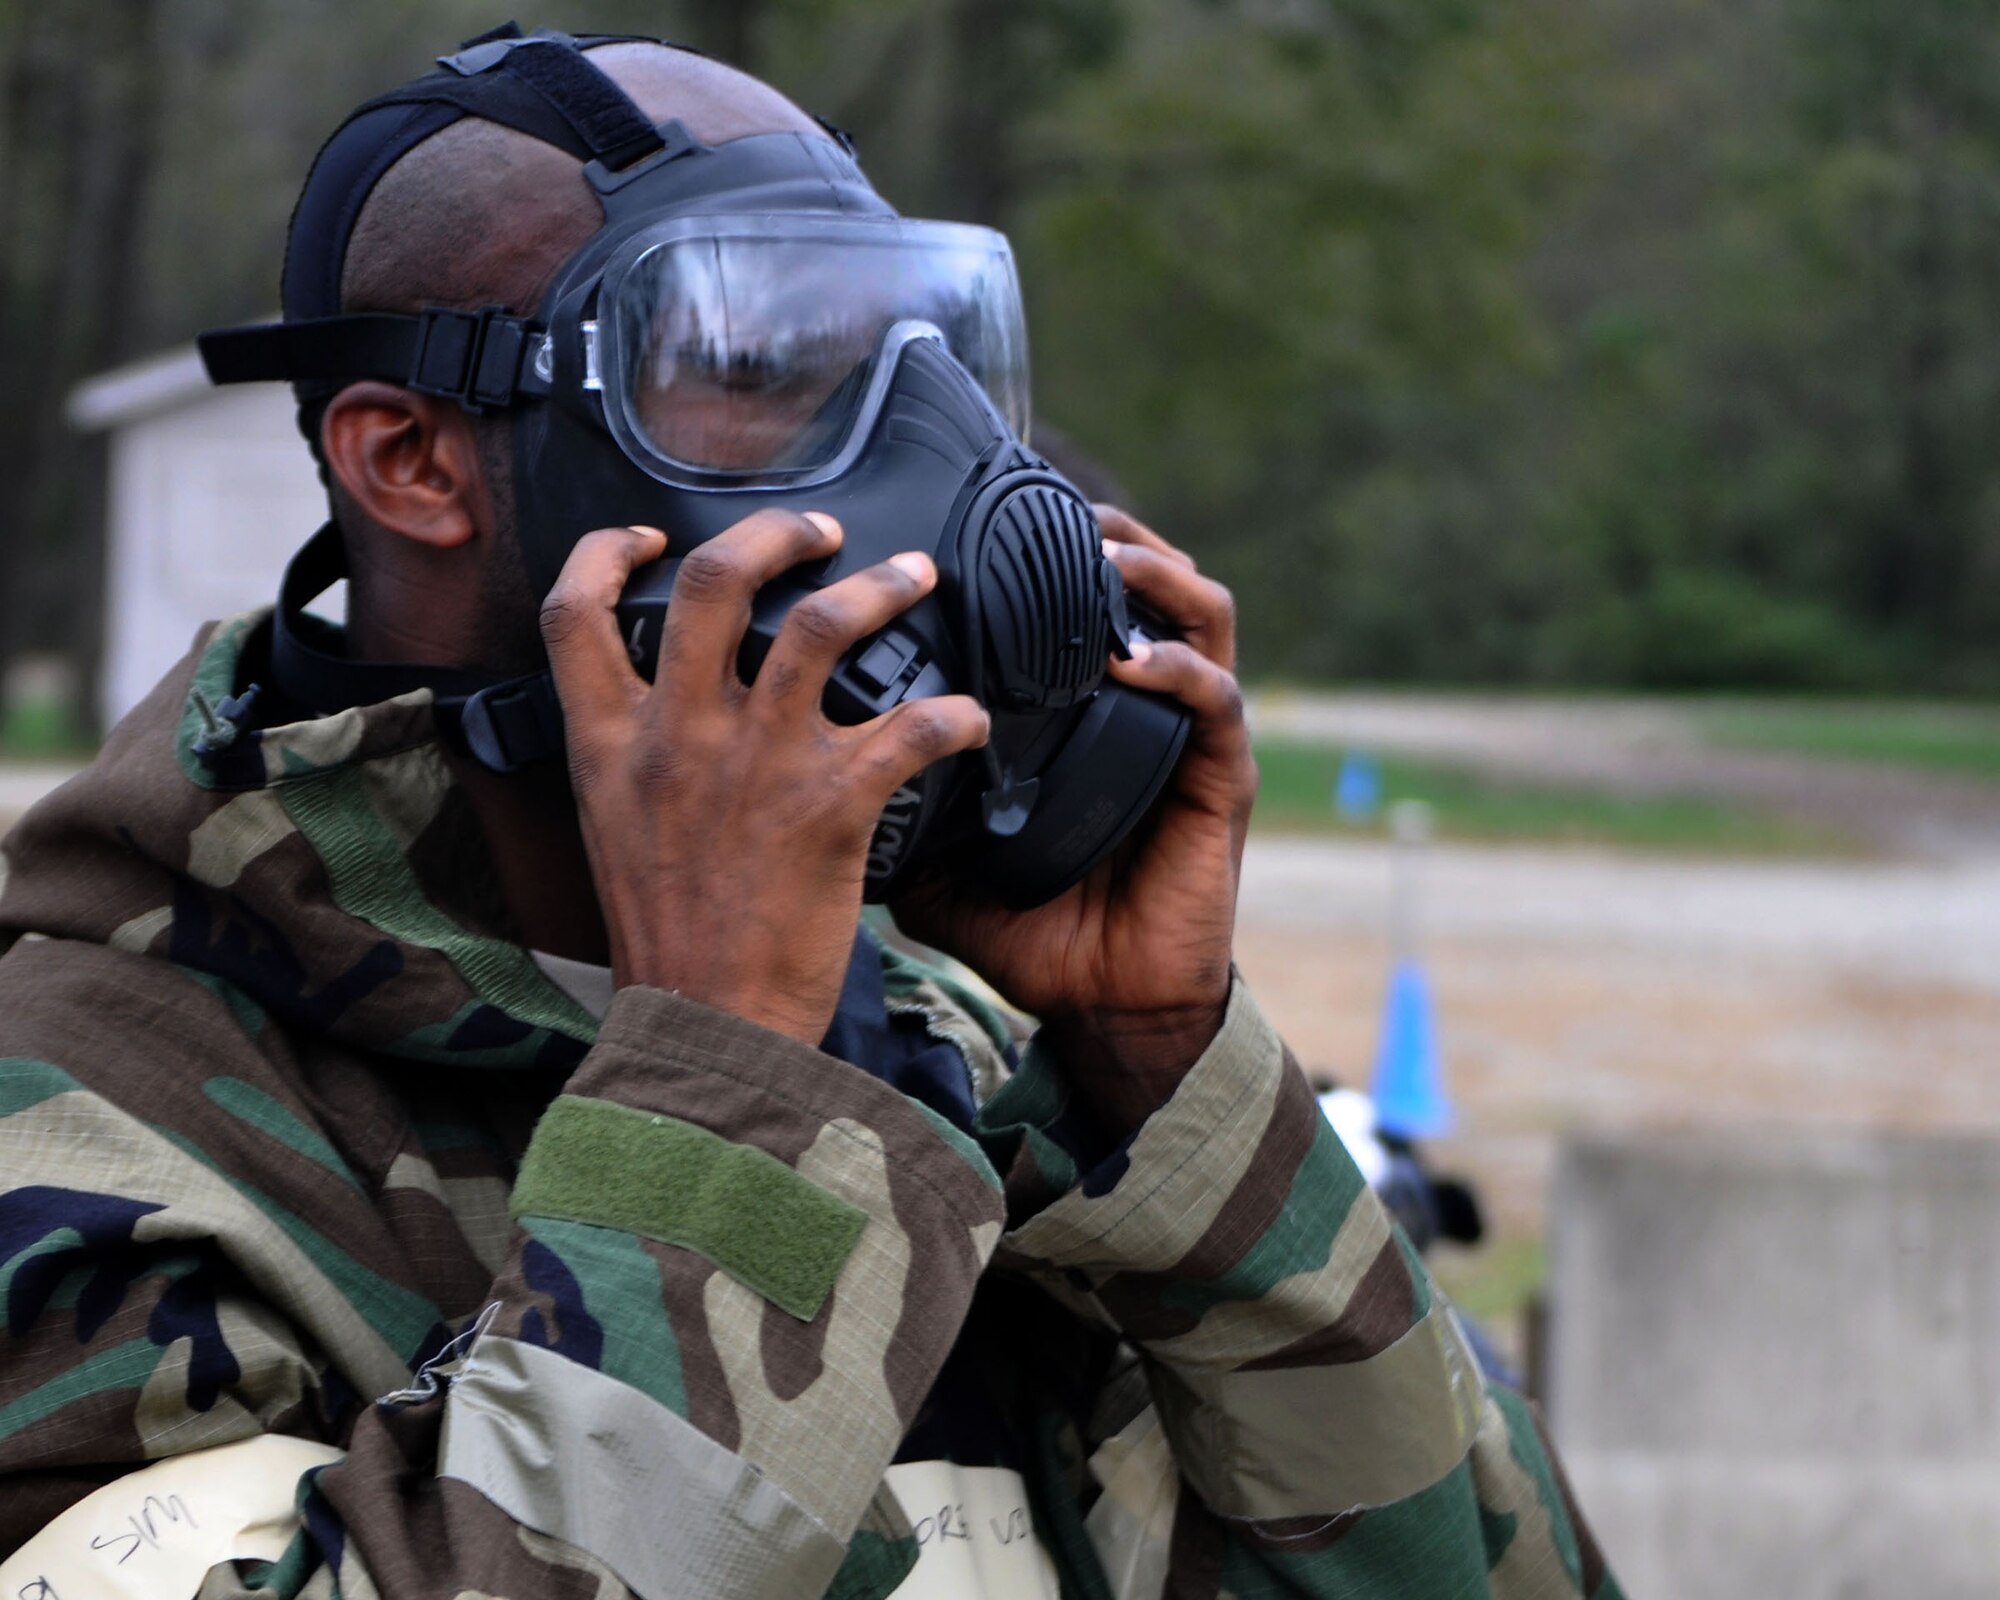 Senior Airman Urowayinor Dore, 445th Civil Engineer Squadron HVAC apprentice, removes his gas mask during Ability to Survive and Operate training conducted at the Wright-Patterson Air Force Base Warfighter Training Center Oct. 15, 2017.